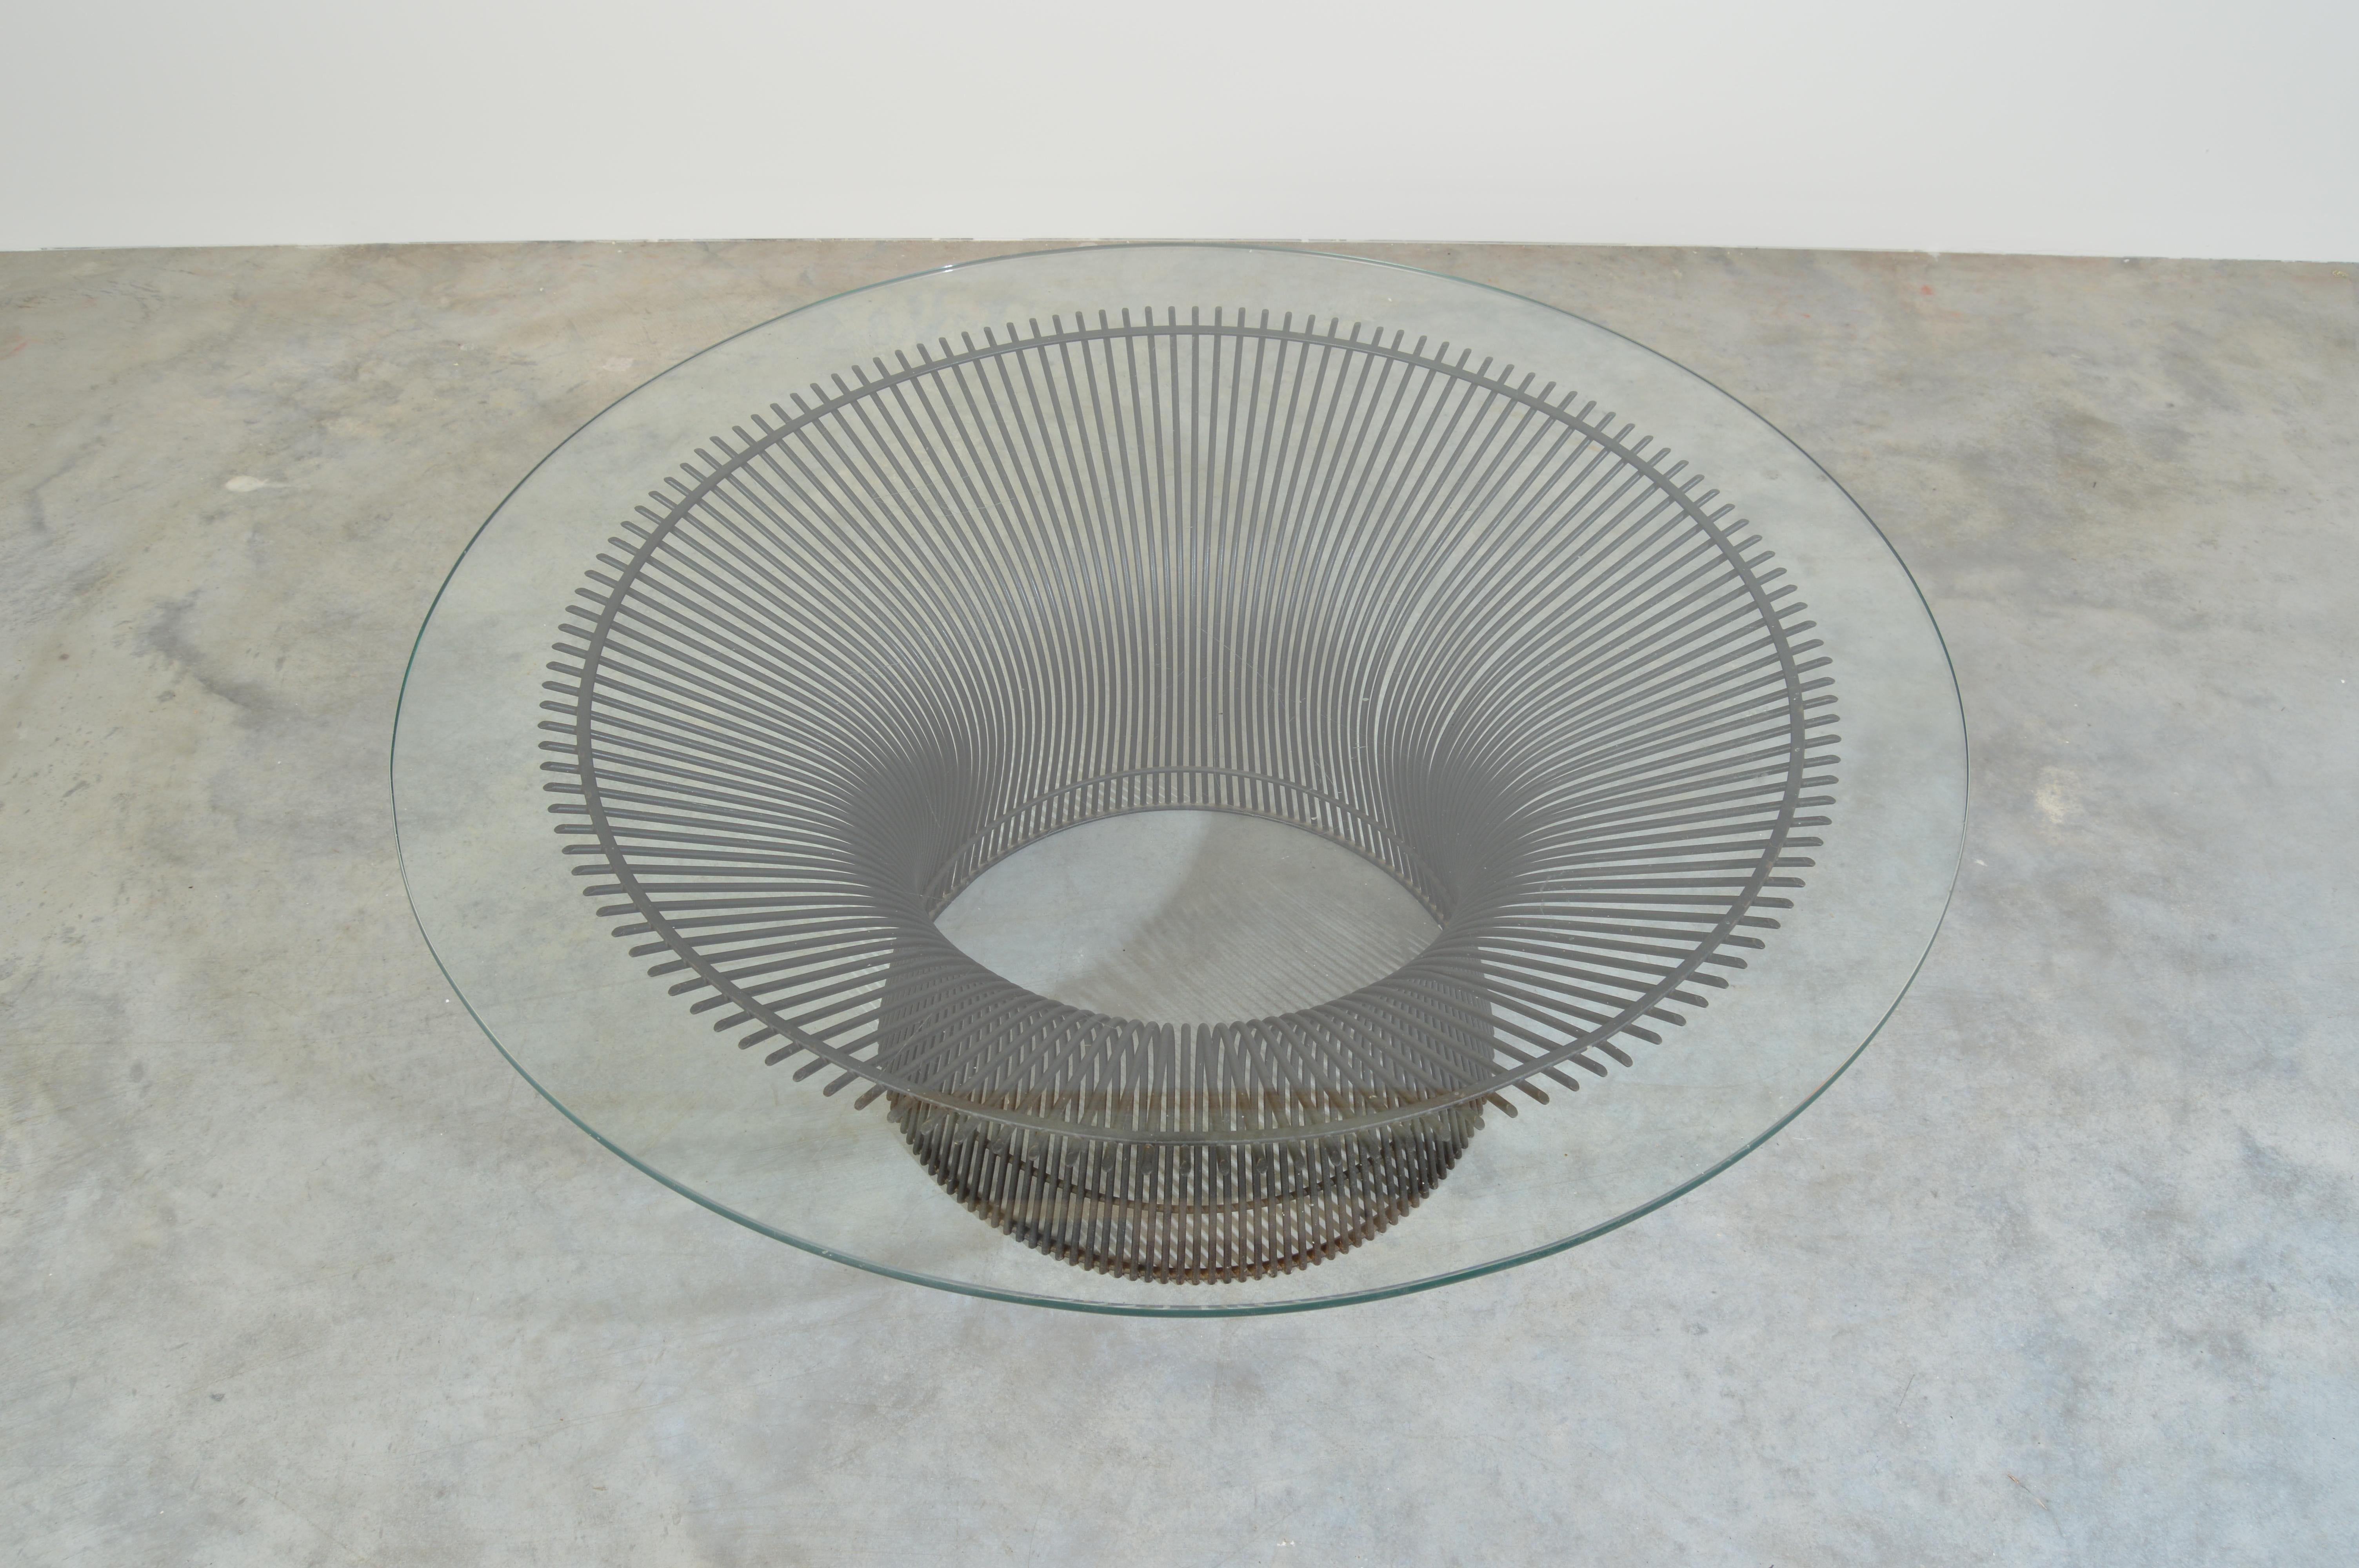 Vintage Warren Platner for Knoll cocktail table in bronze with 36” glass top at 1/2” thickness, circa 1960
Wire frame is in outstanding condition. Glass has some line scratches on one side from usage.
Note: We can order new glass for an additional